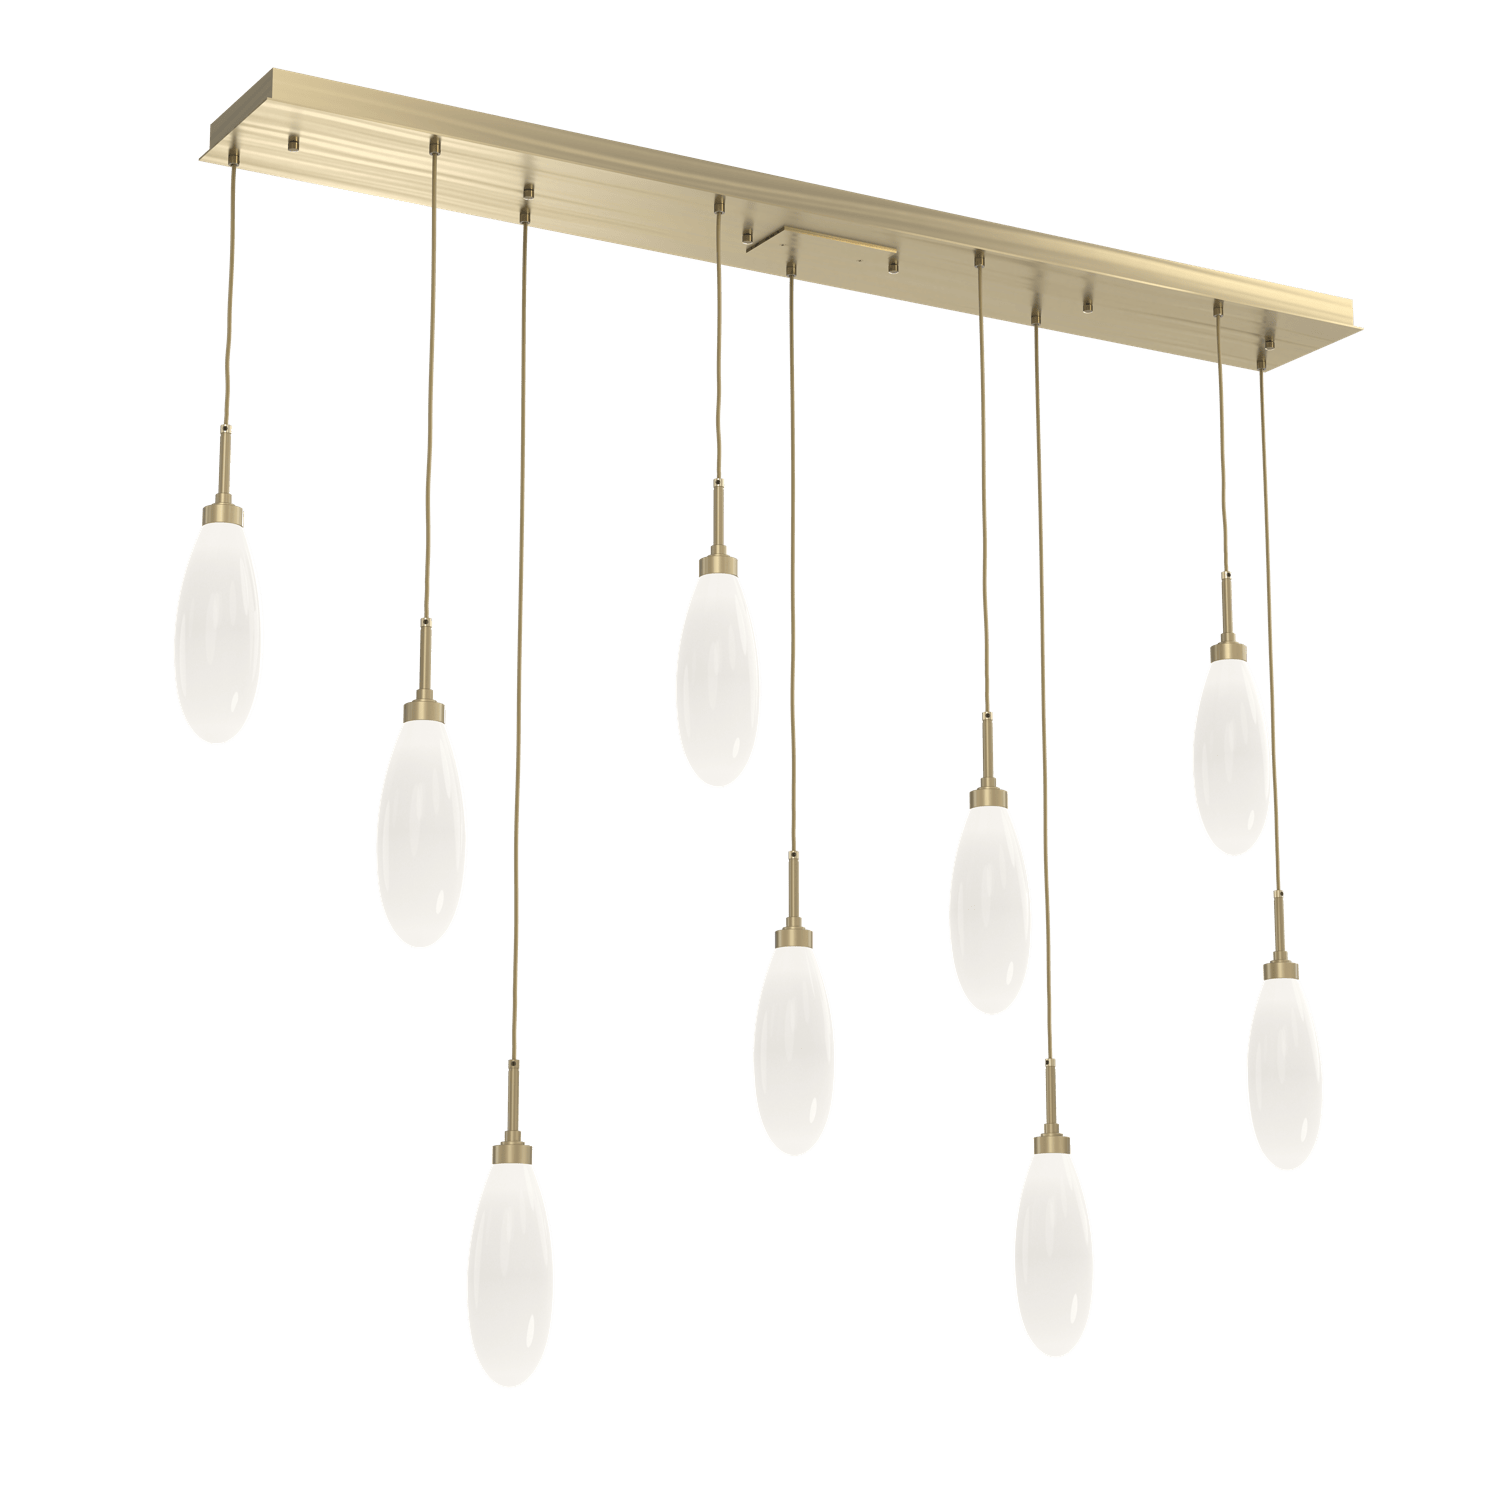 PLB0071-09-HB-WL-LL-Hammerton-Studio-Fiori-9-light-linear-pendant-chandelier-with-heritage-brass-finish-and-opal-white-glass-shades-and-LED-lamping